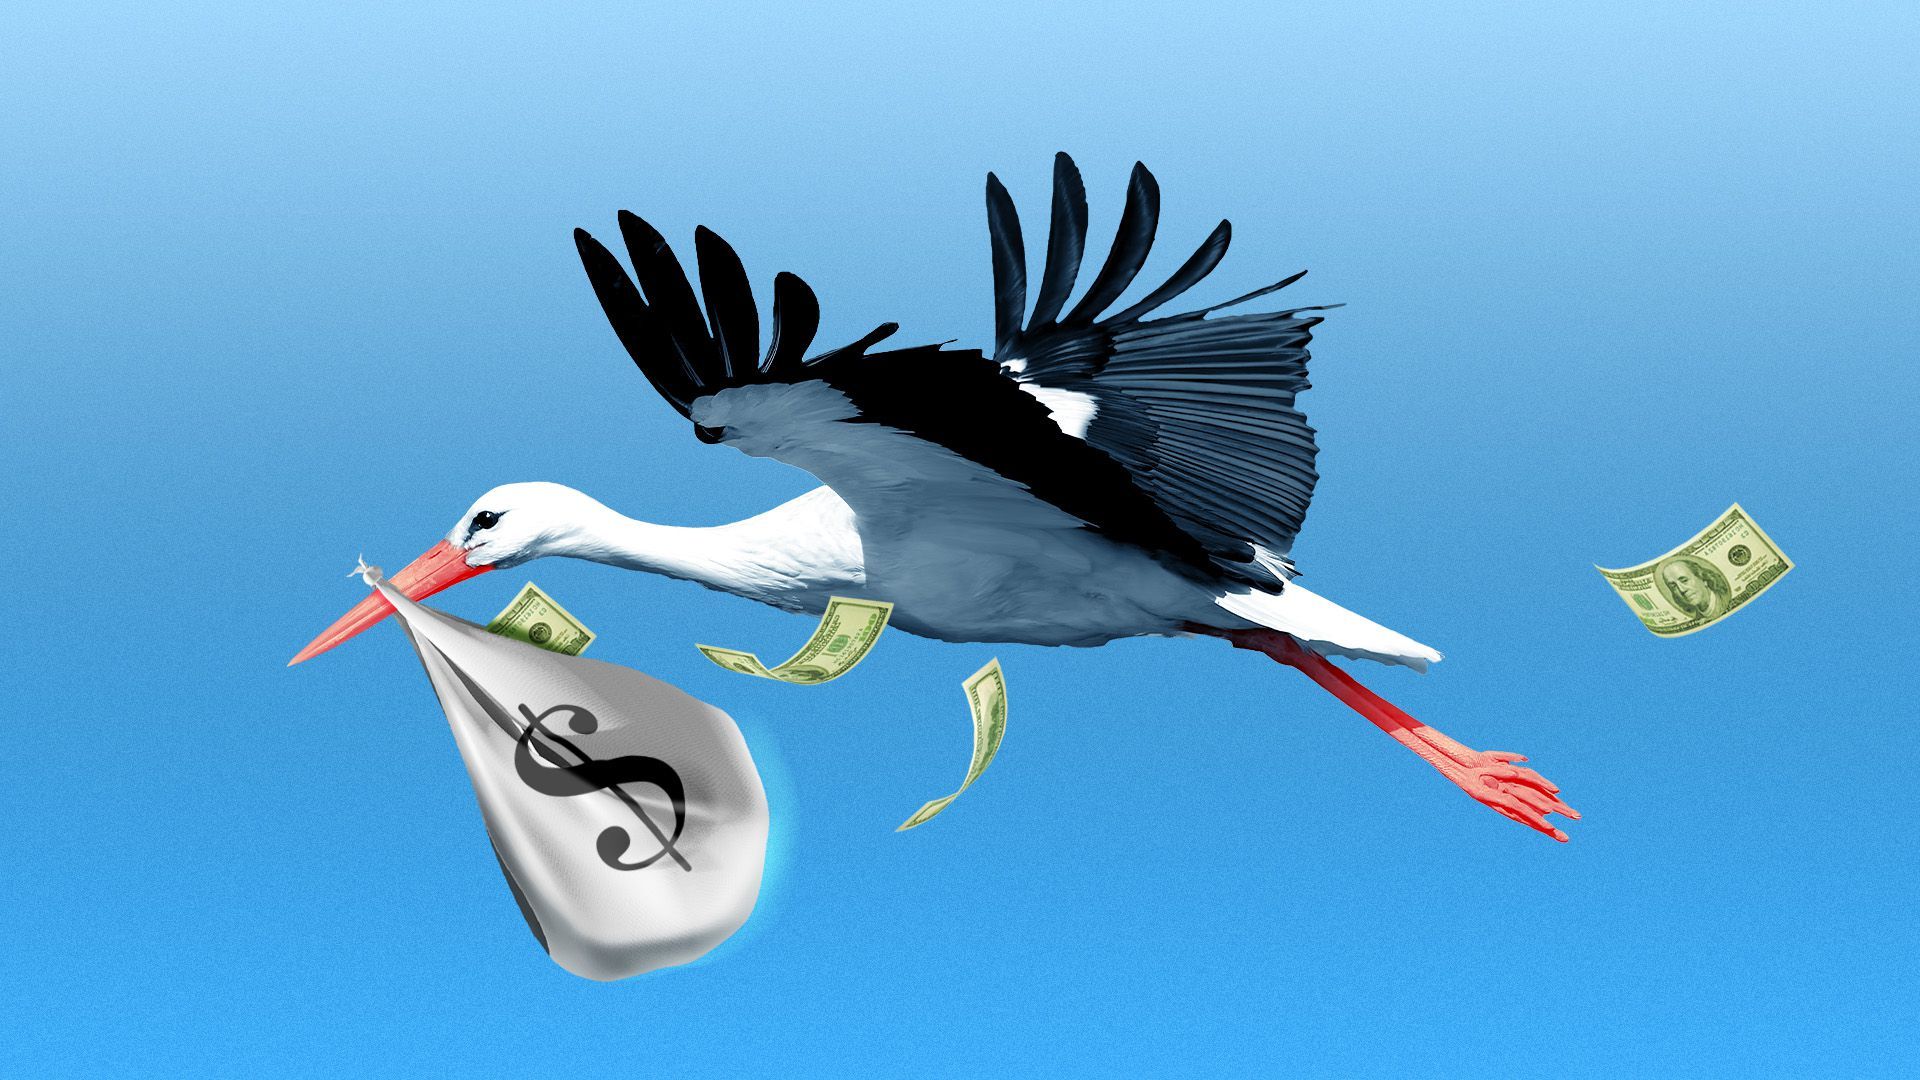 Illustration of a stork carrying a bag of money.